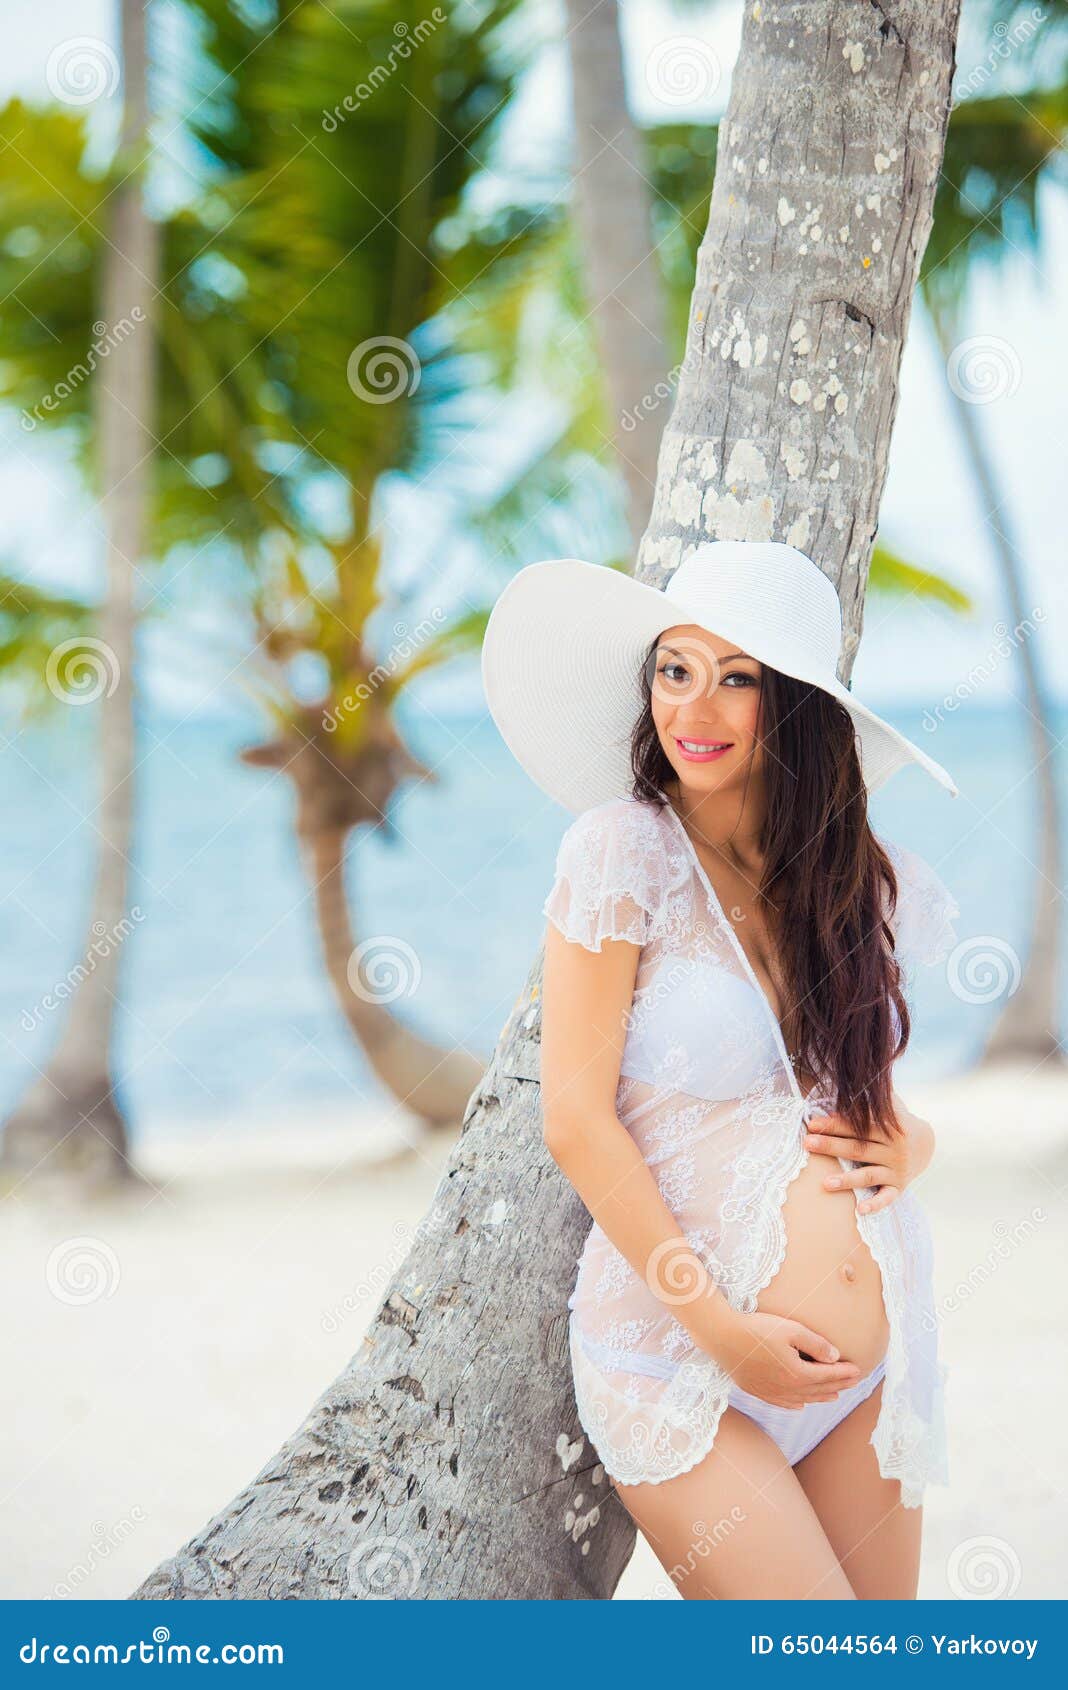 tropical places to visit while pregnant